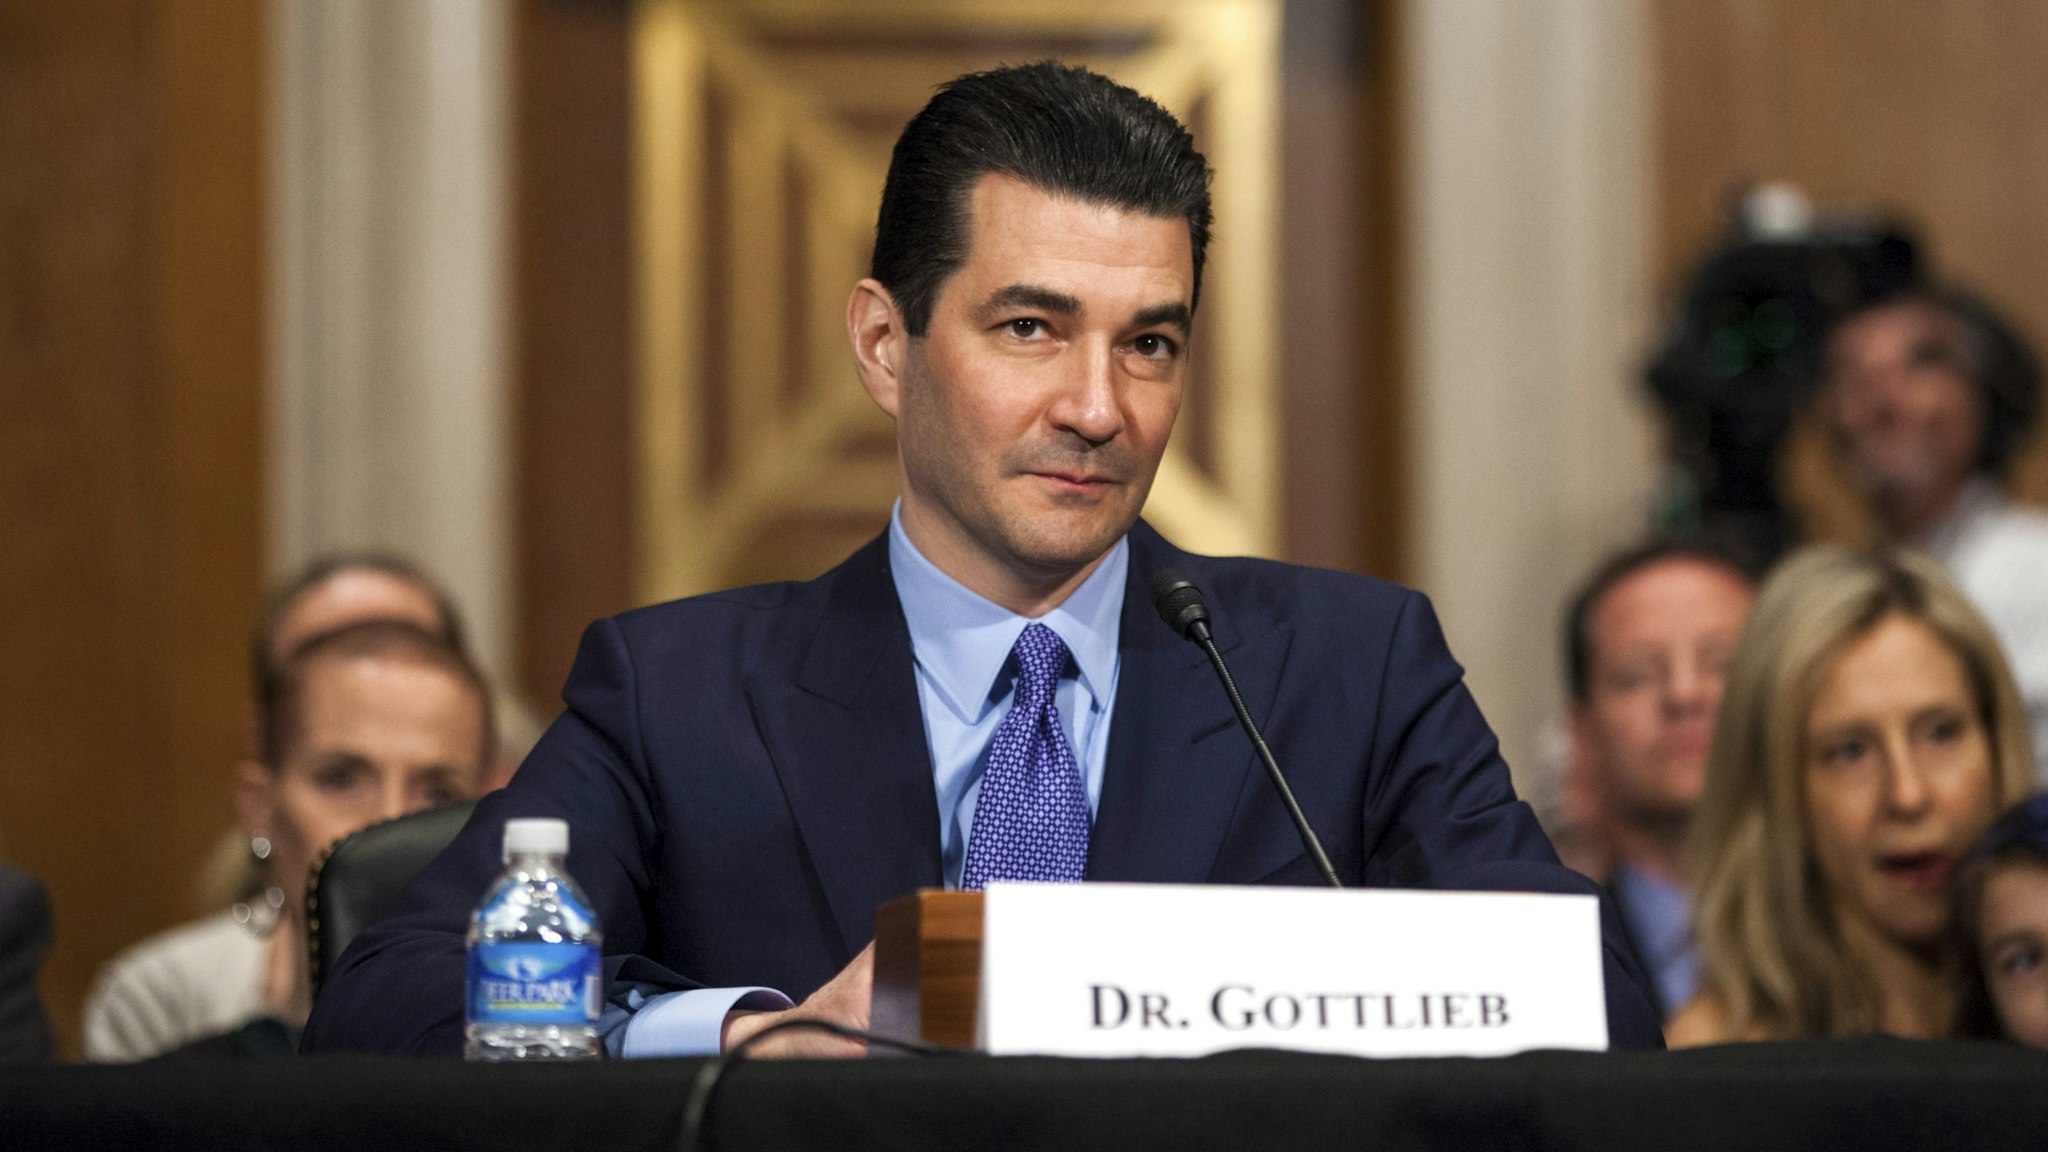 WASHINGTON, D.C. - APRIL 05: FDA Commissioner-designate Scott Gottlieb testifies during a Senate Health, Education, Labor and Pensions Committee hearing on April 5, 2017 at on Capitol Hill in Washington, D.C.